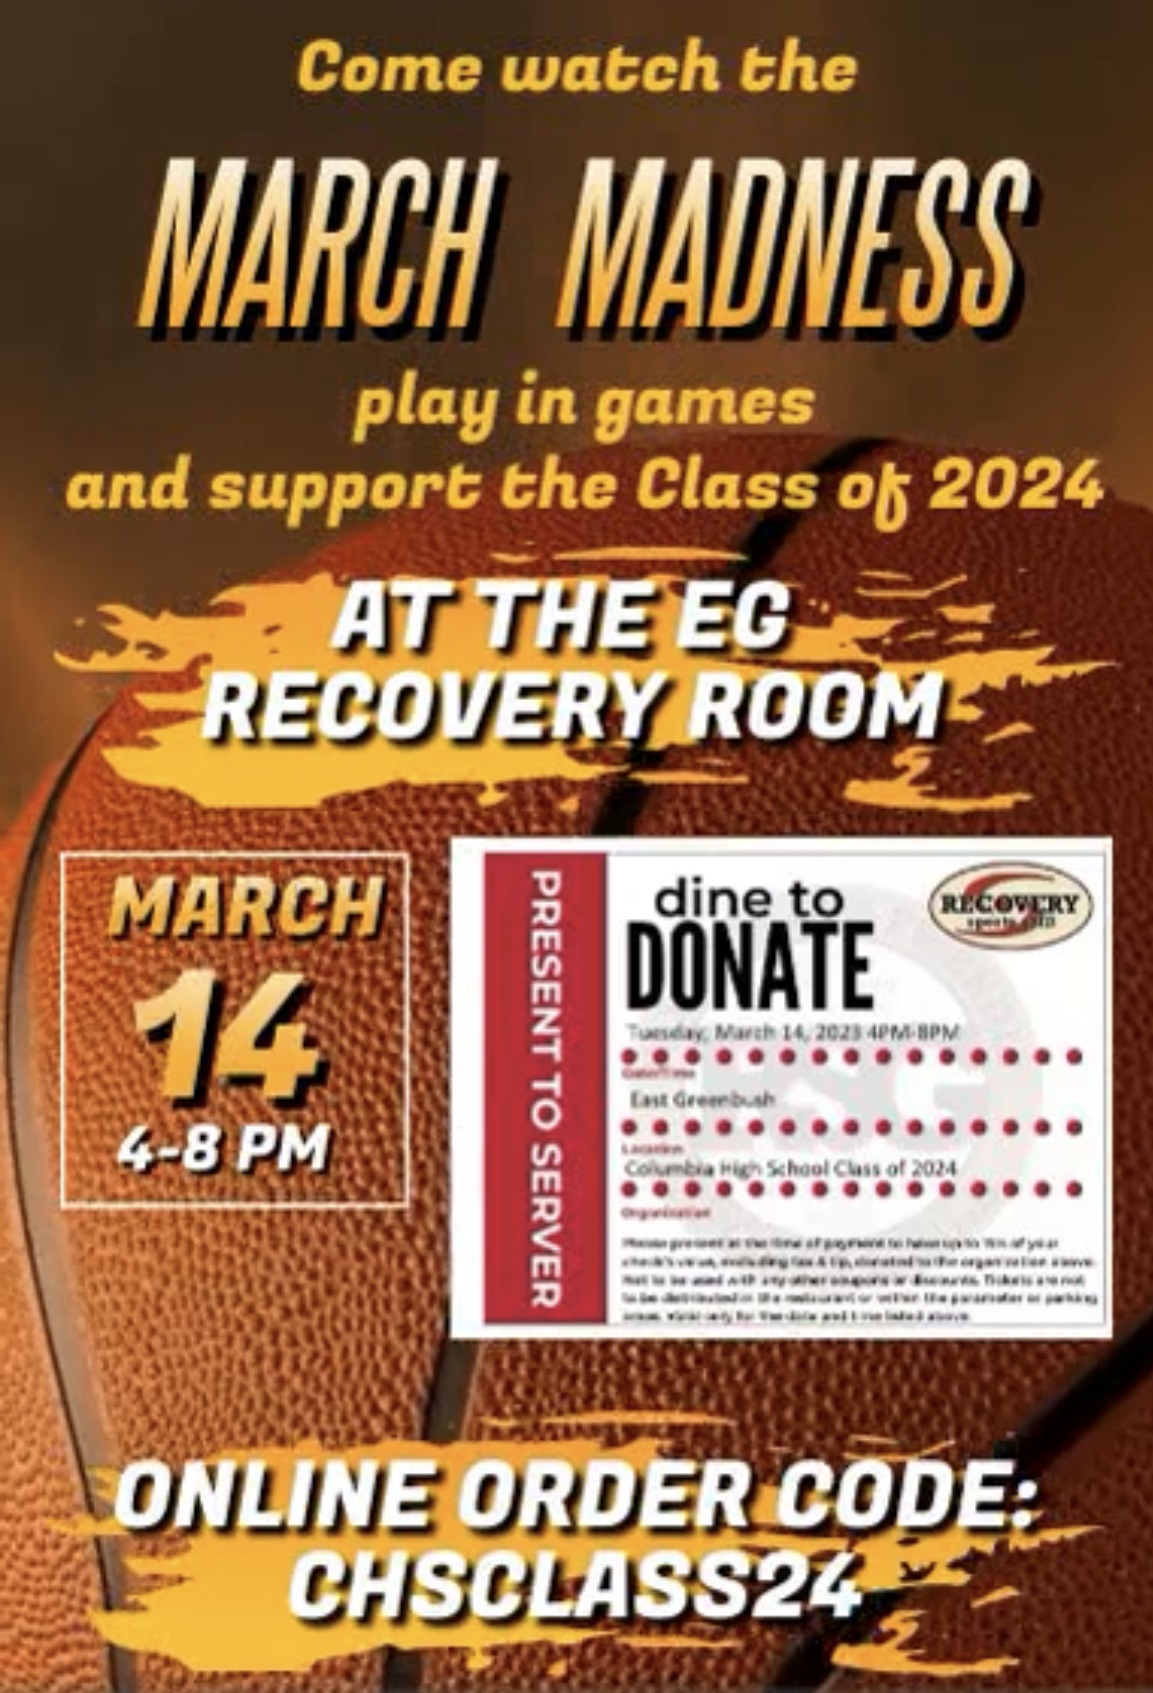 Recovery Sports Grill flyer